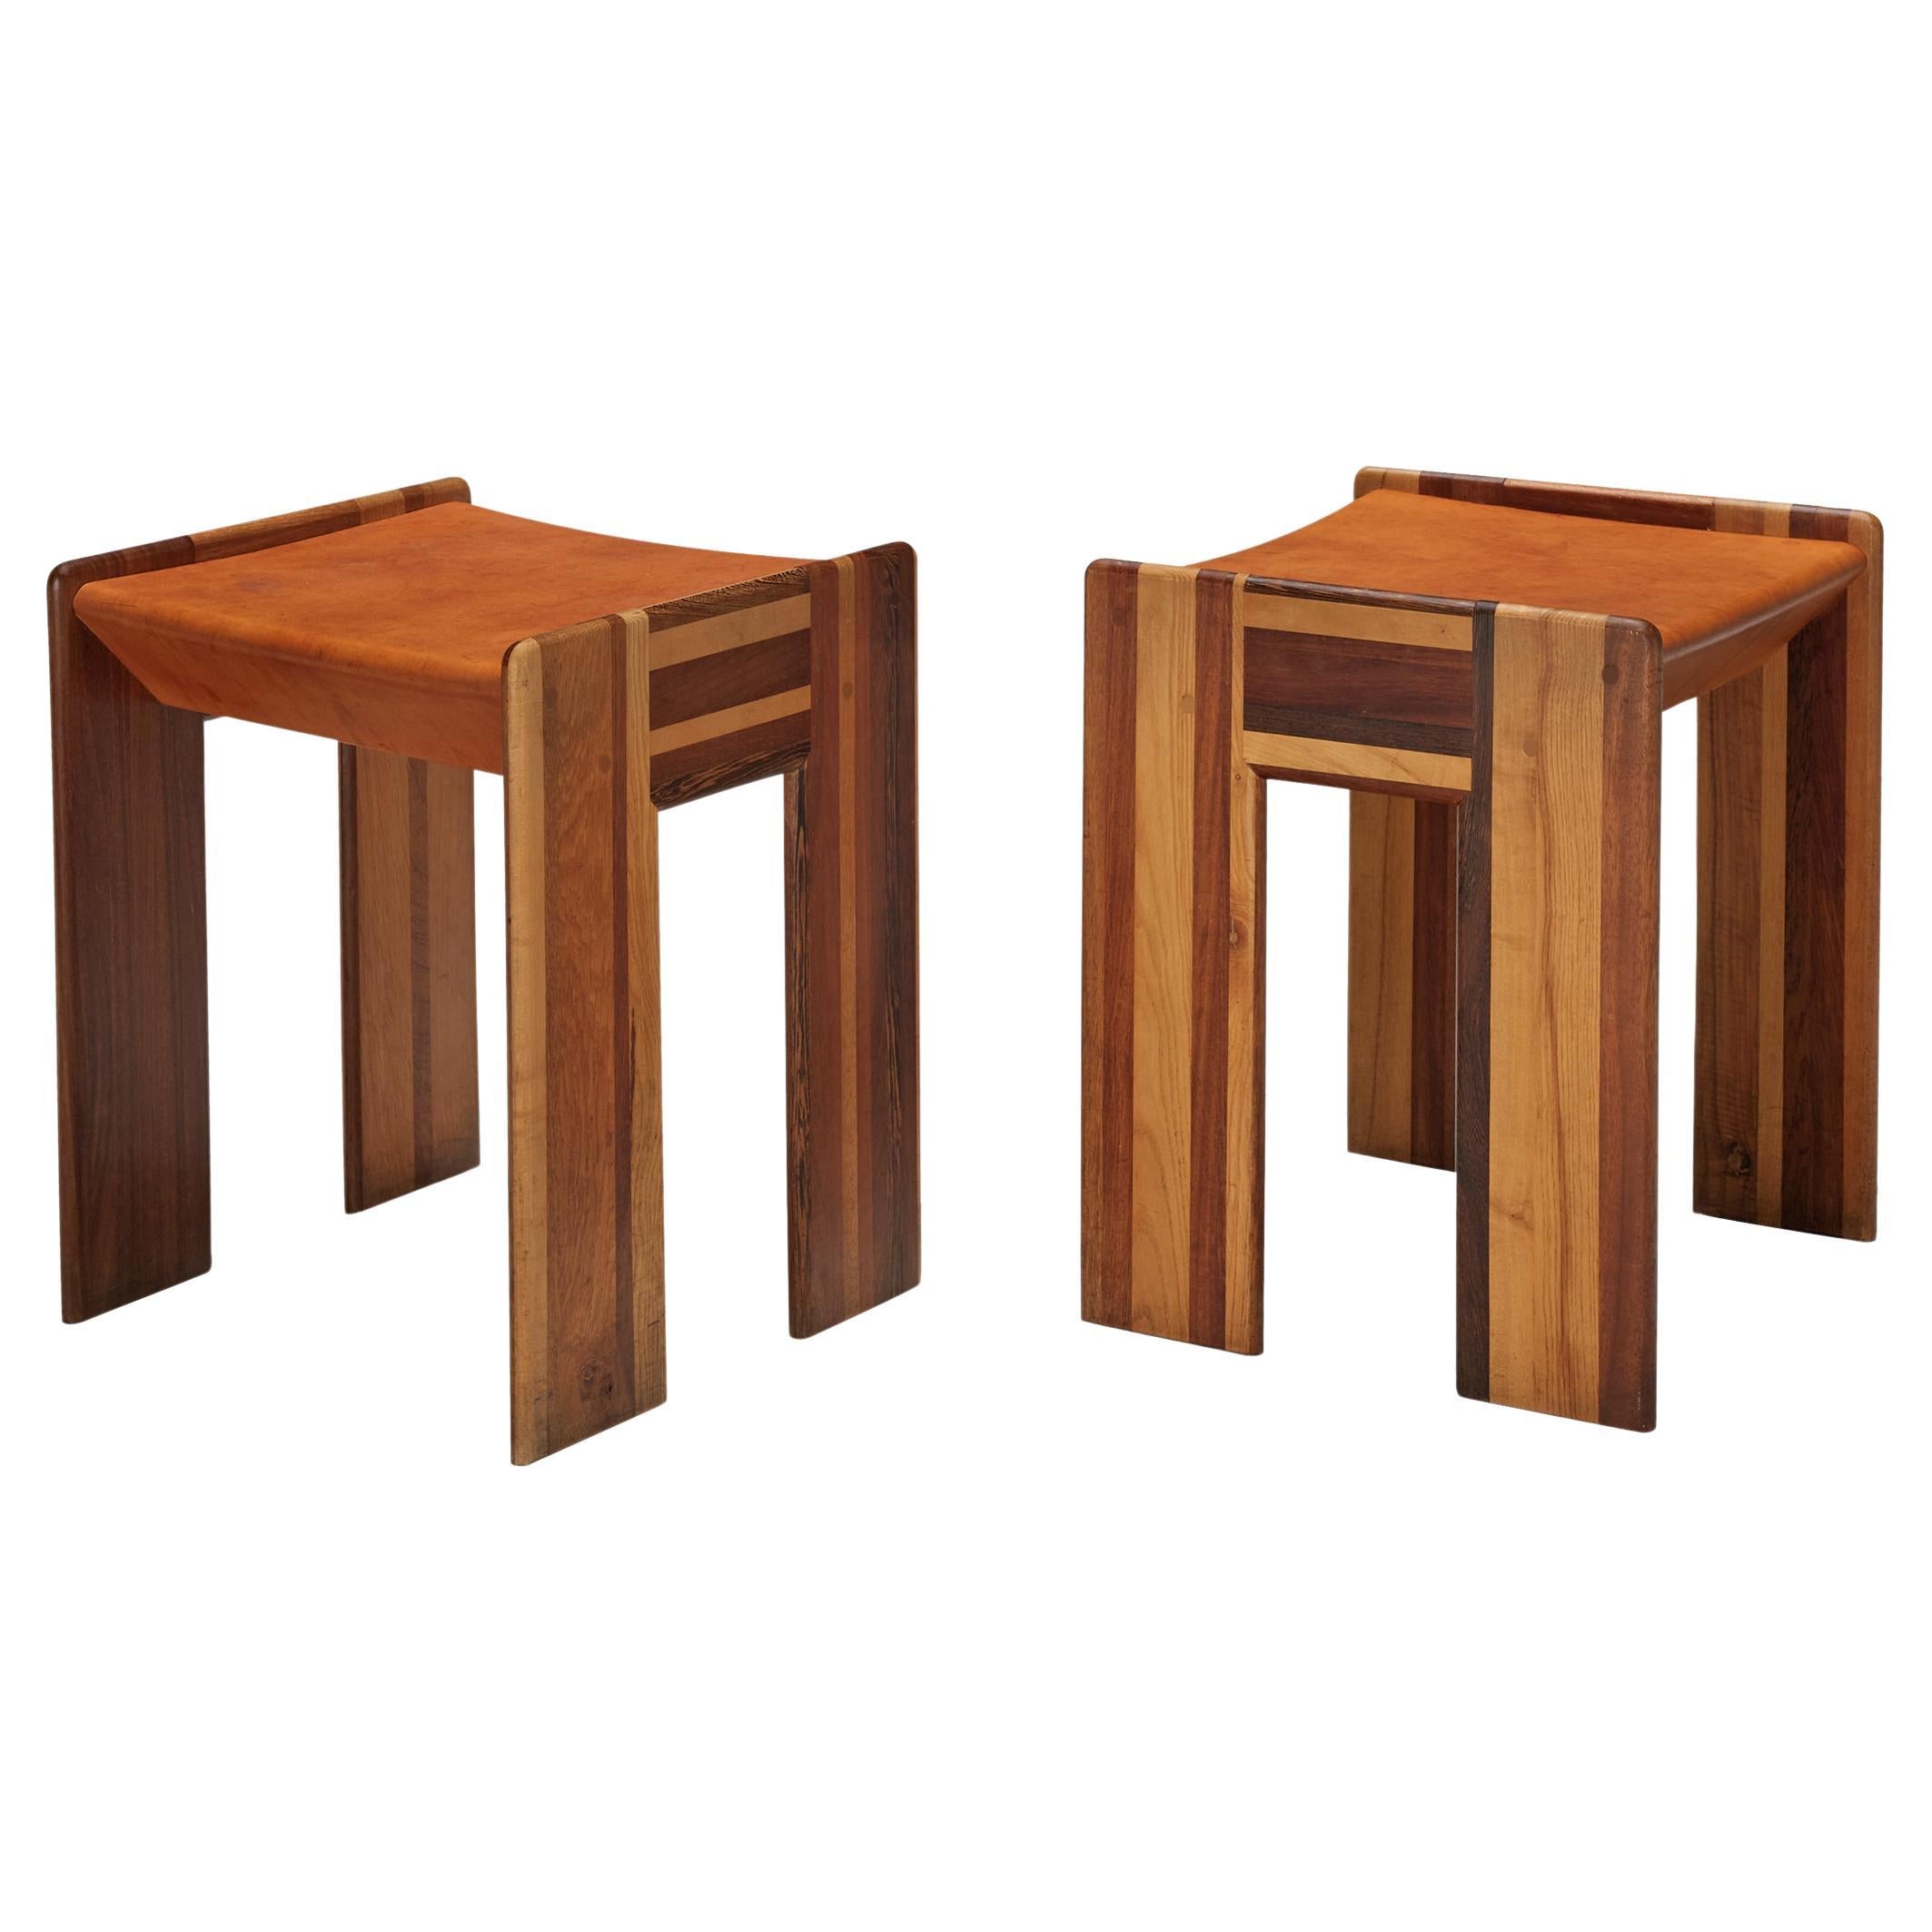 Afra & Tobia Scarpa 'Benetton' Stools in Mixed Wood and Cognac Leather For Sale